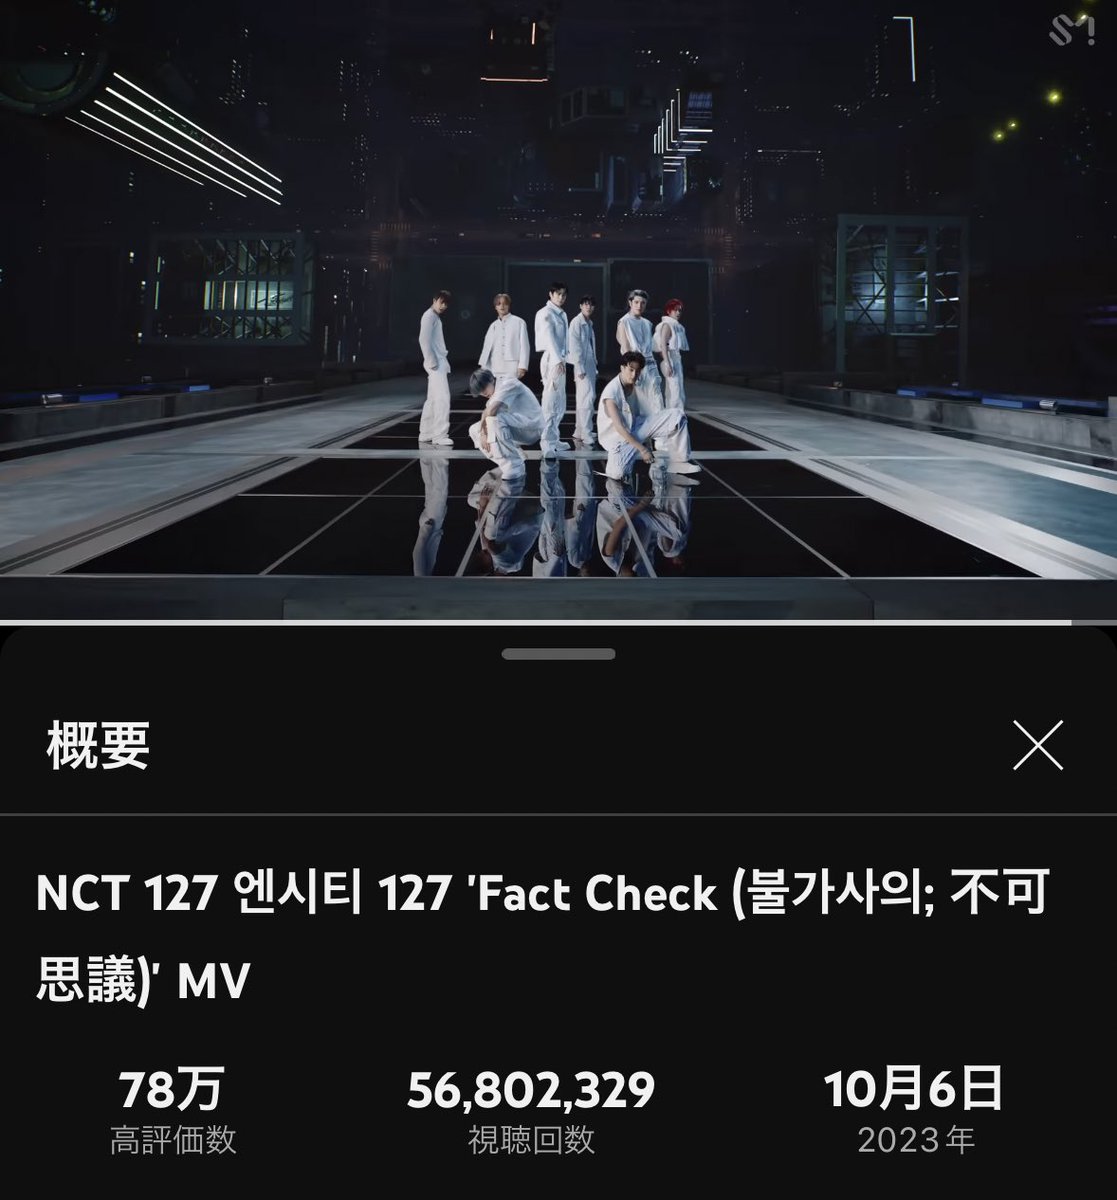 Let’s stream #NCT127_FactCheck 
Make a new record for fastest 100M views 

🔗youtu.be/vGuJuW0bDWA

#FactCheckTo100M 
#NCT127

【Previous record】
Kick It :10mths 20days
🔥Fact Check :10mths(8/6)